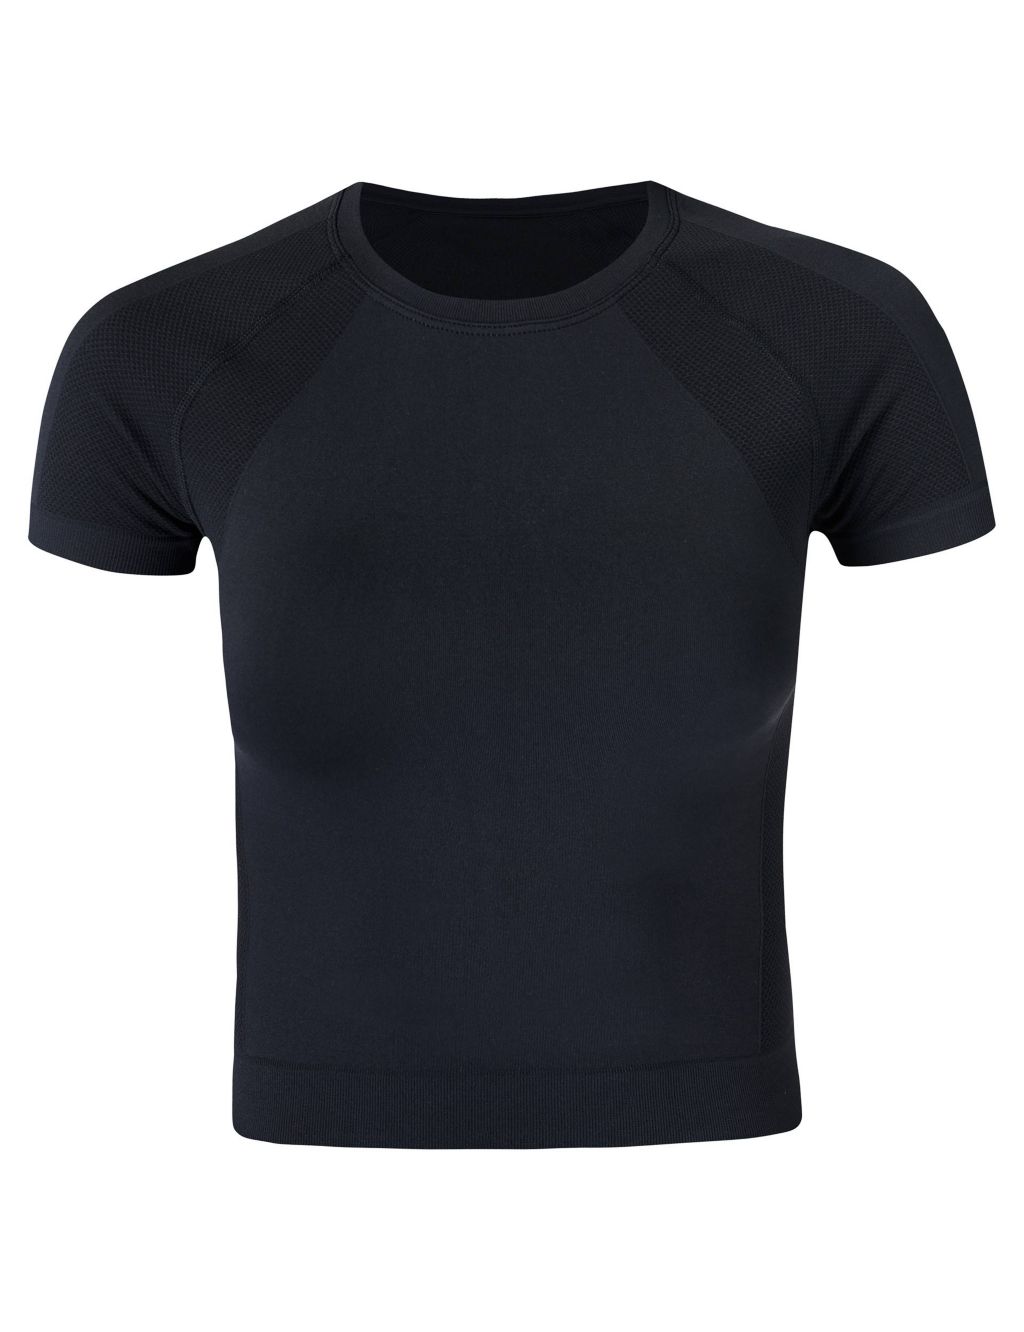 Athlete Seamless Fitted Crop T-Shirt image 2